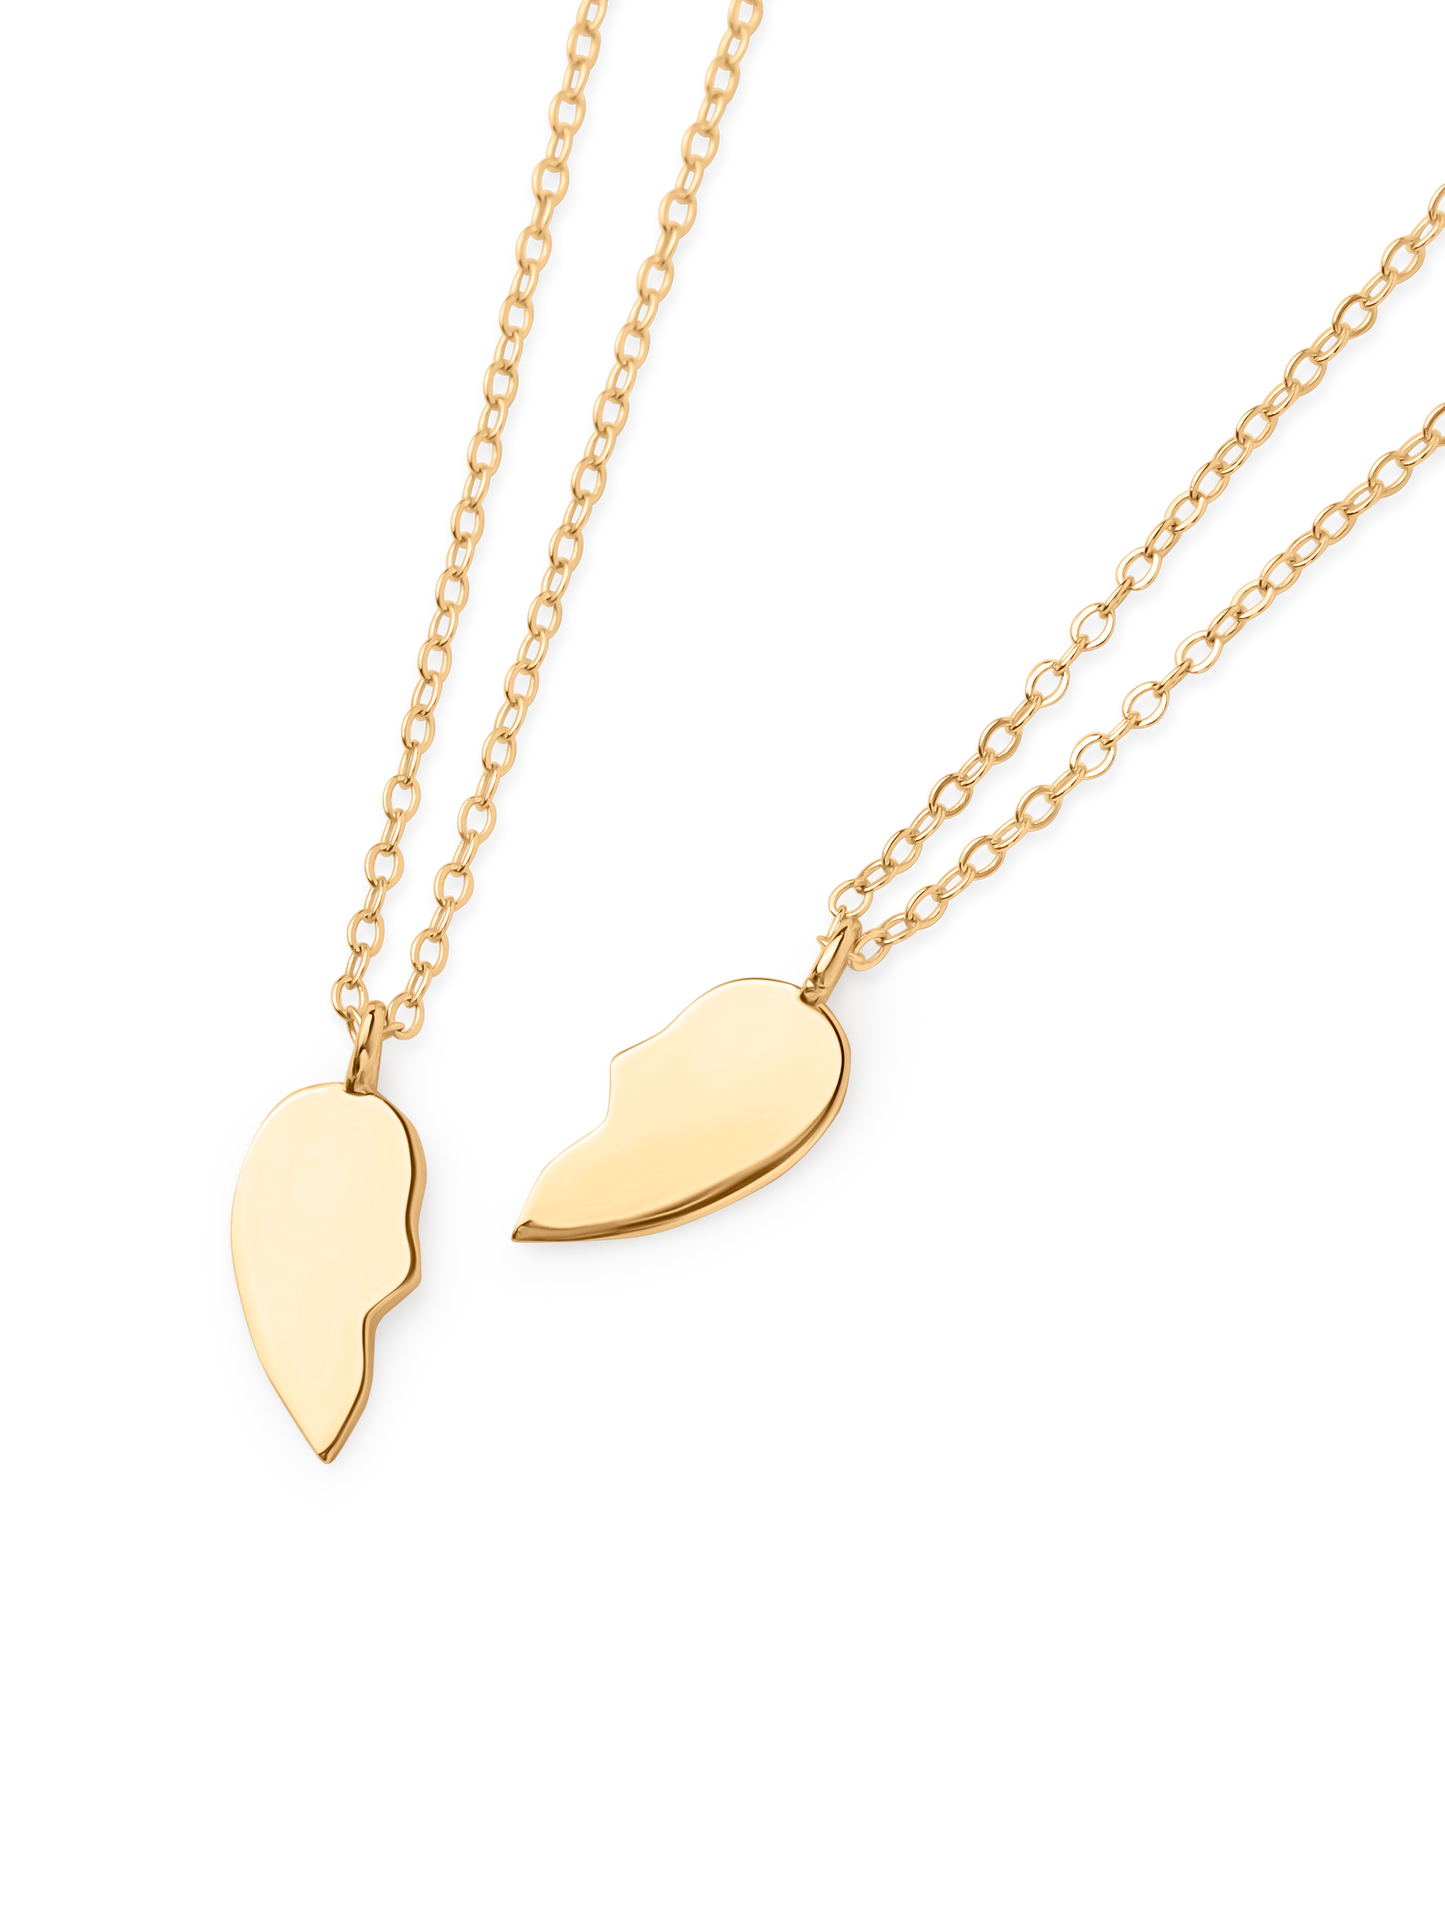 shared heart necklace 18k gold plated brass